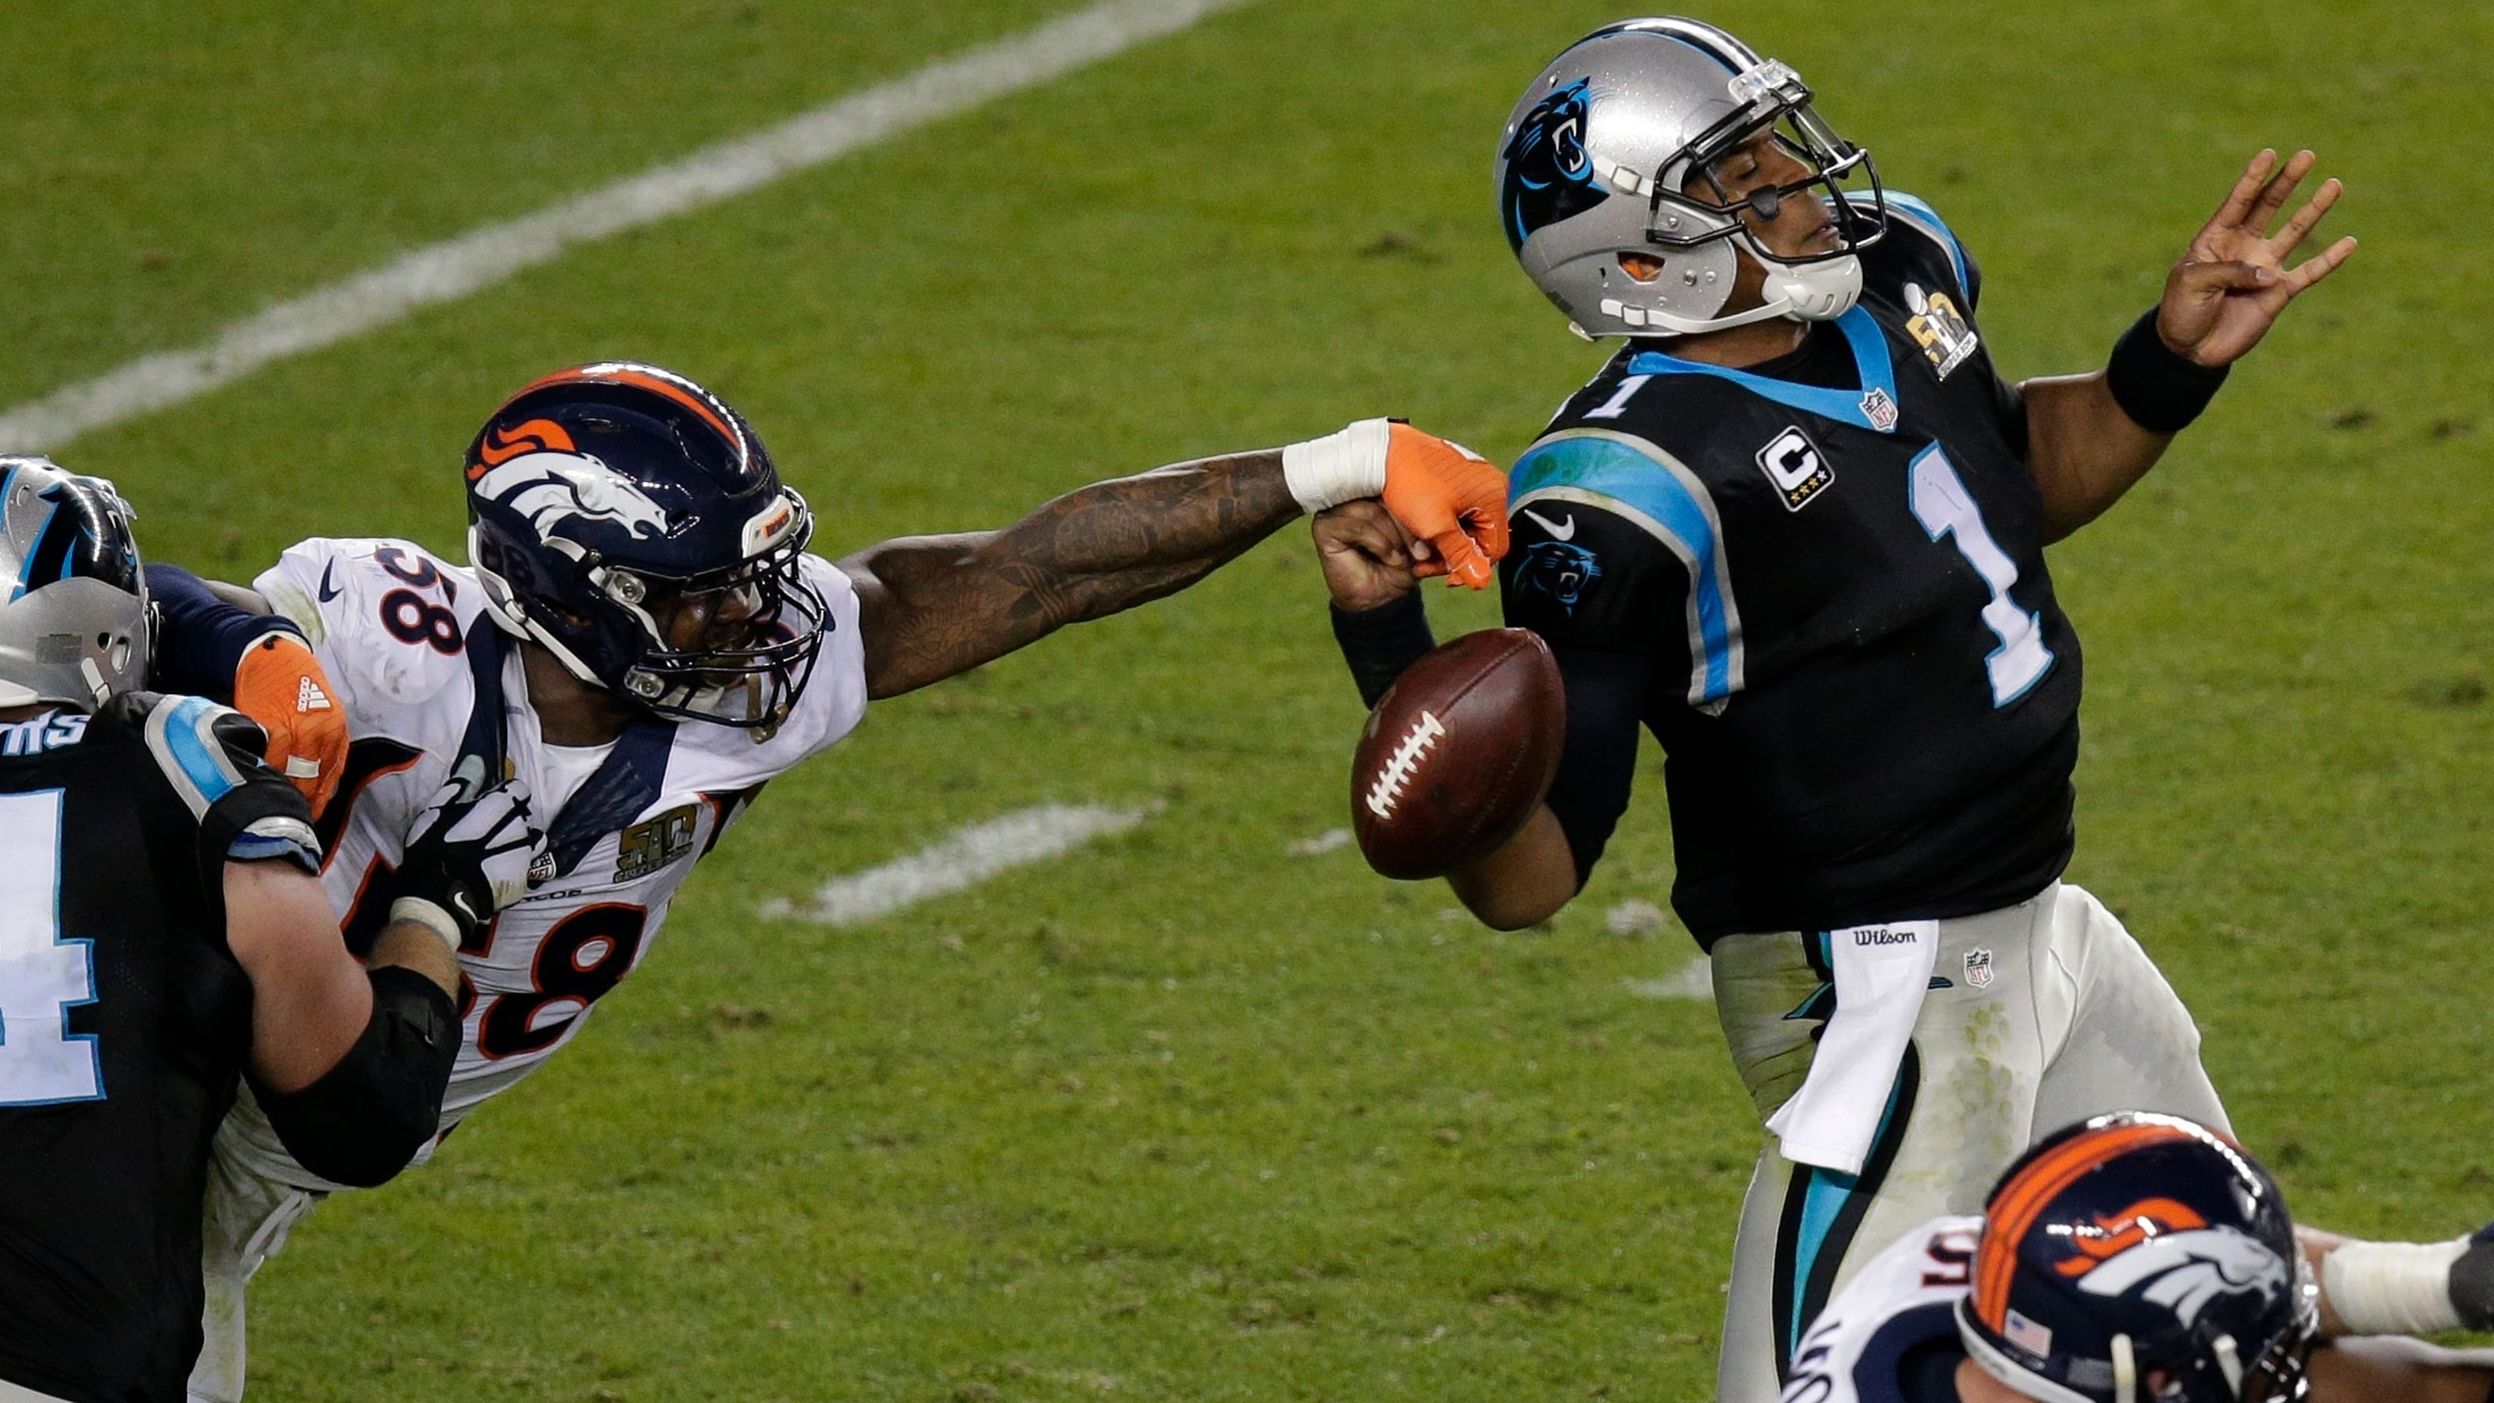 <strong>Super Bowl 50 (2016):</strong> Denver linebacker Von Miller knocks the ball out of Cam Newton's hand during the Broncos' 24-10 victory over Carolina. Miller had two forced fumbles in the game. Both were deep in Carolina territory, and one was recovered by a teammate for a touchdown.